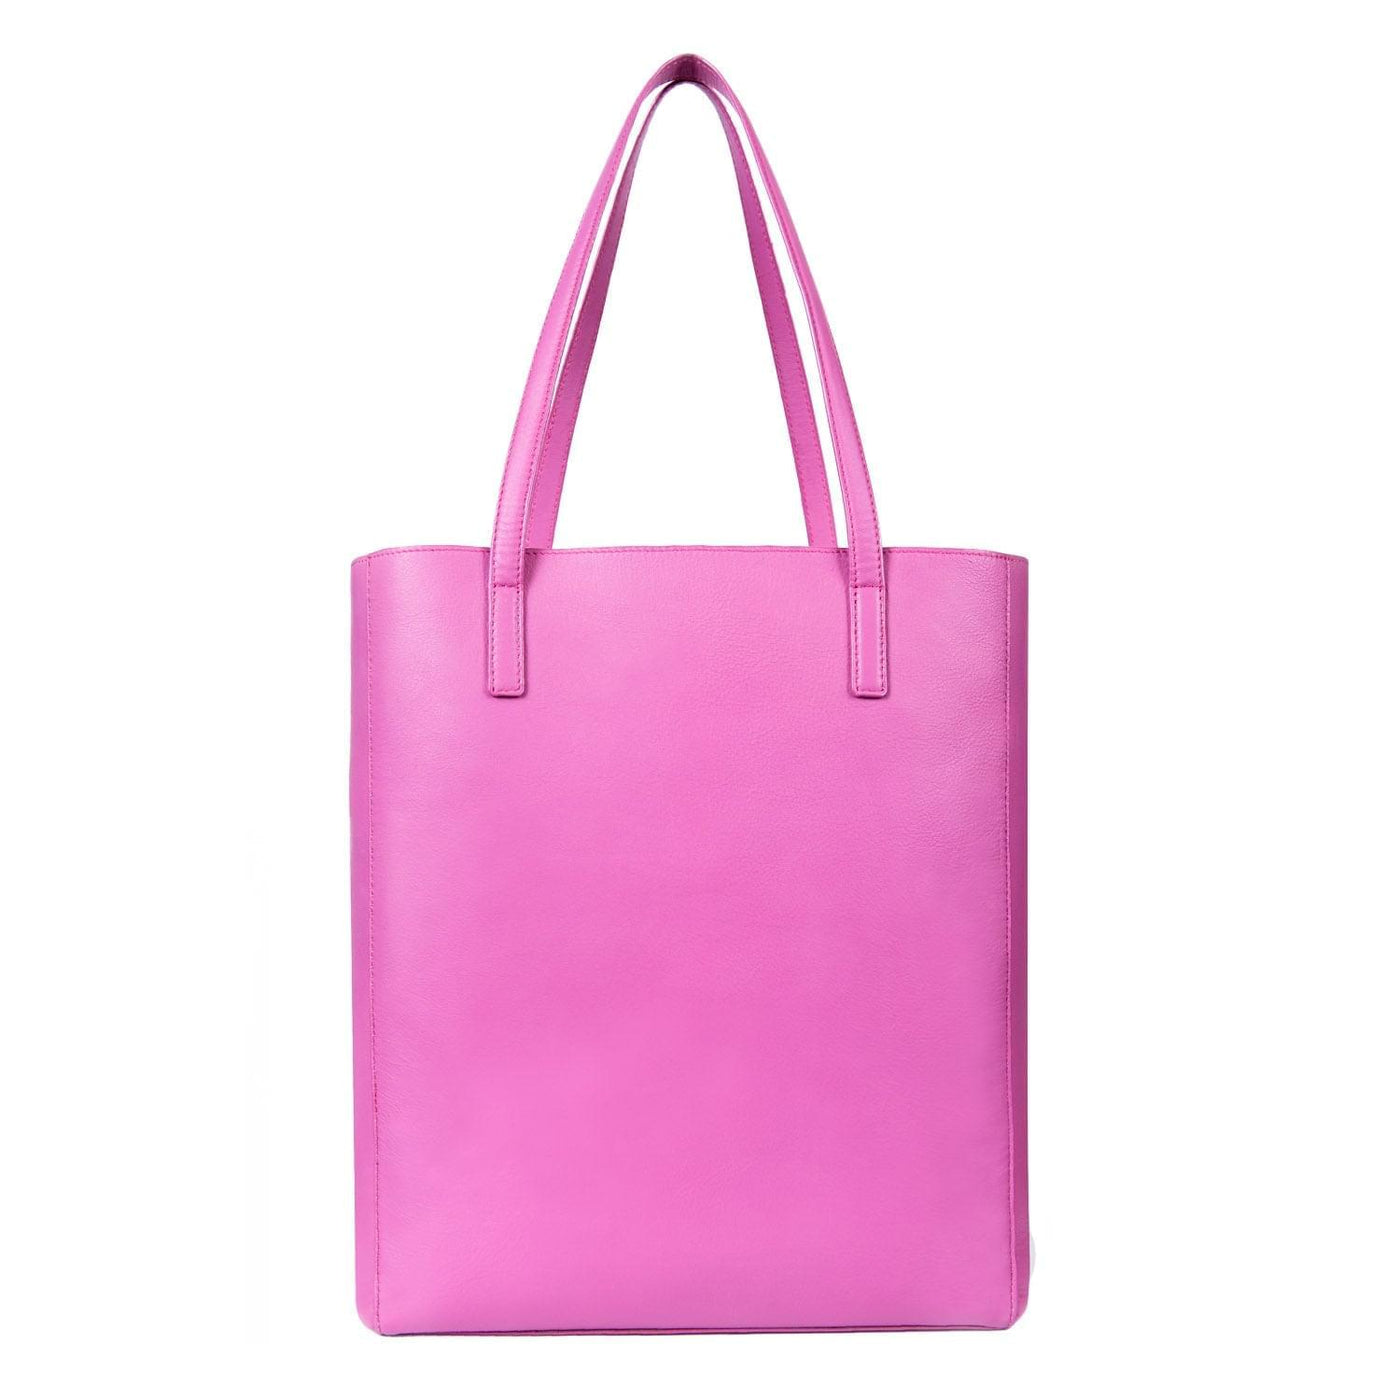 Grab n Go Rose Tote - Women's tote bag for everyday use